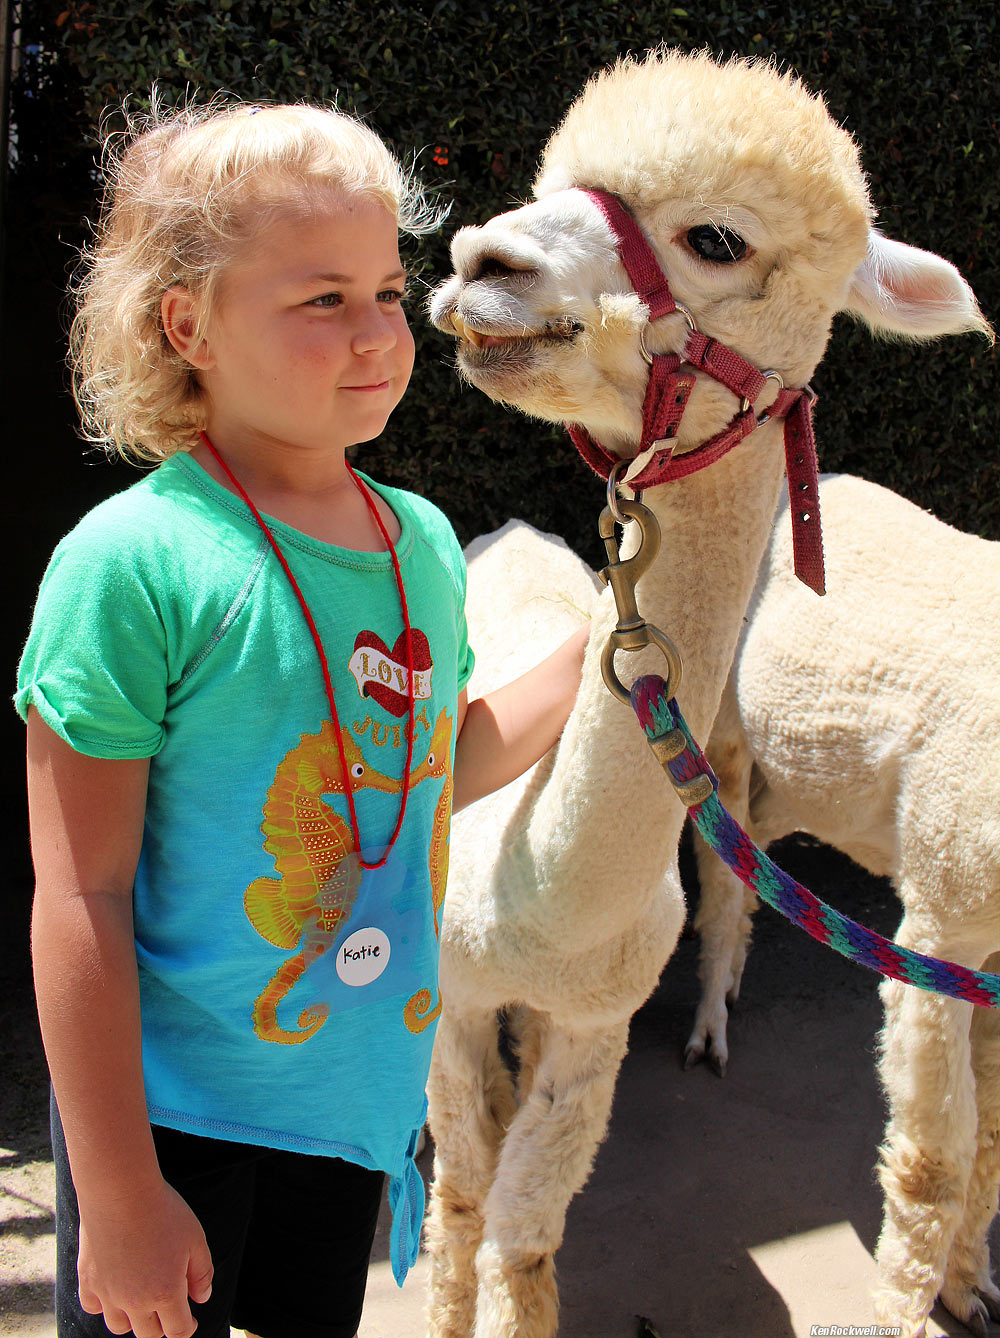 Katie and the Alpaca at Critter Camp